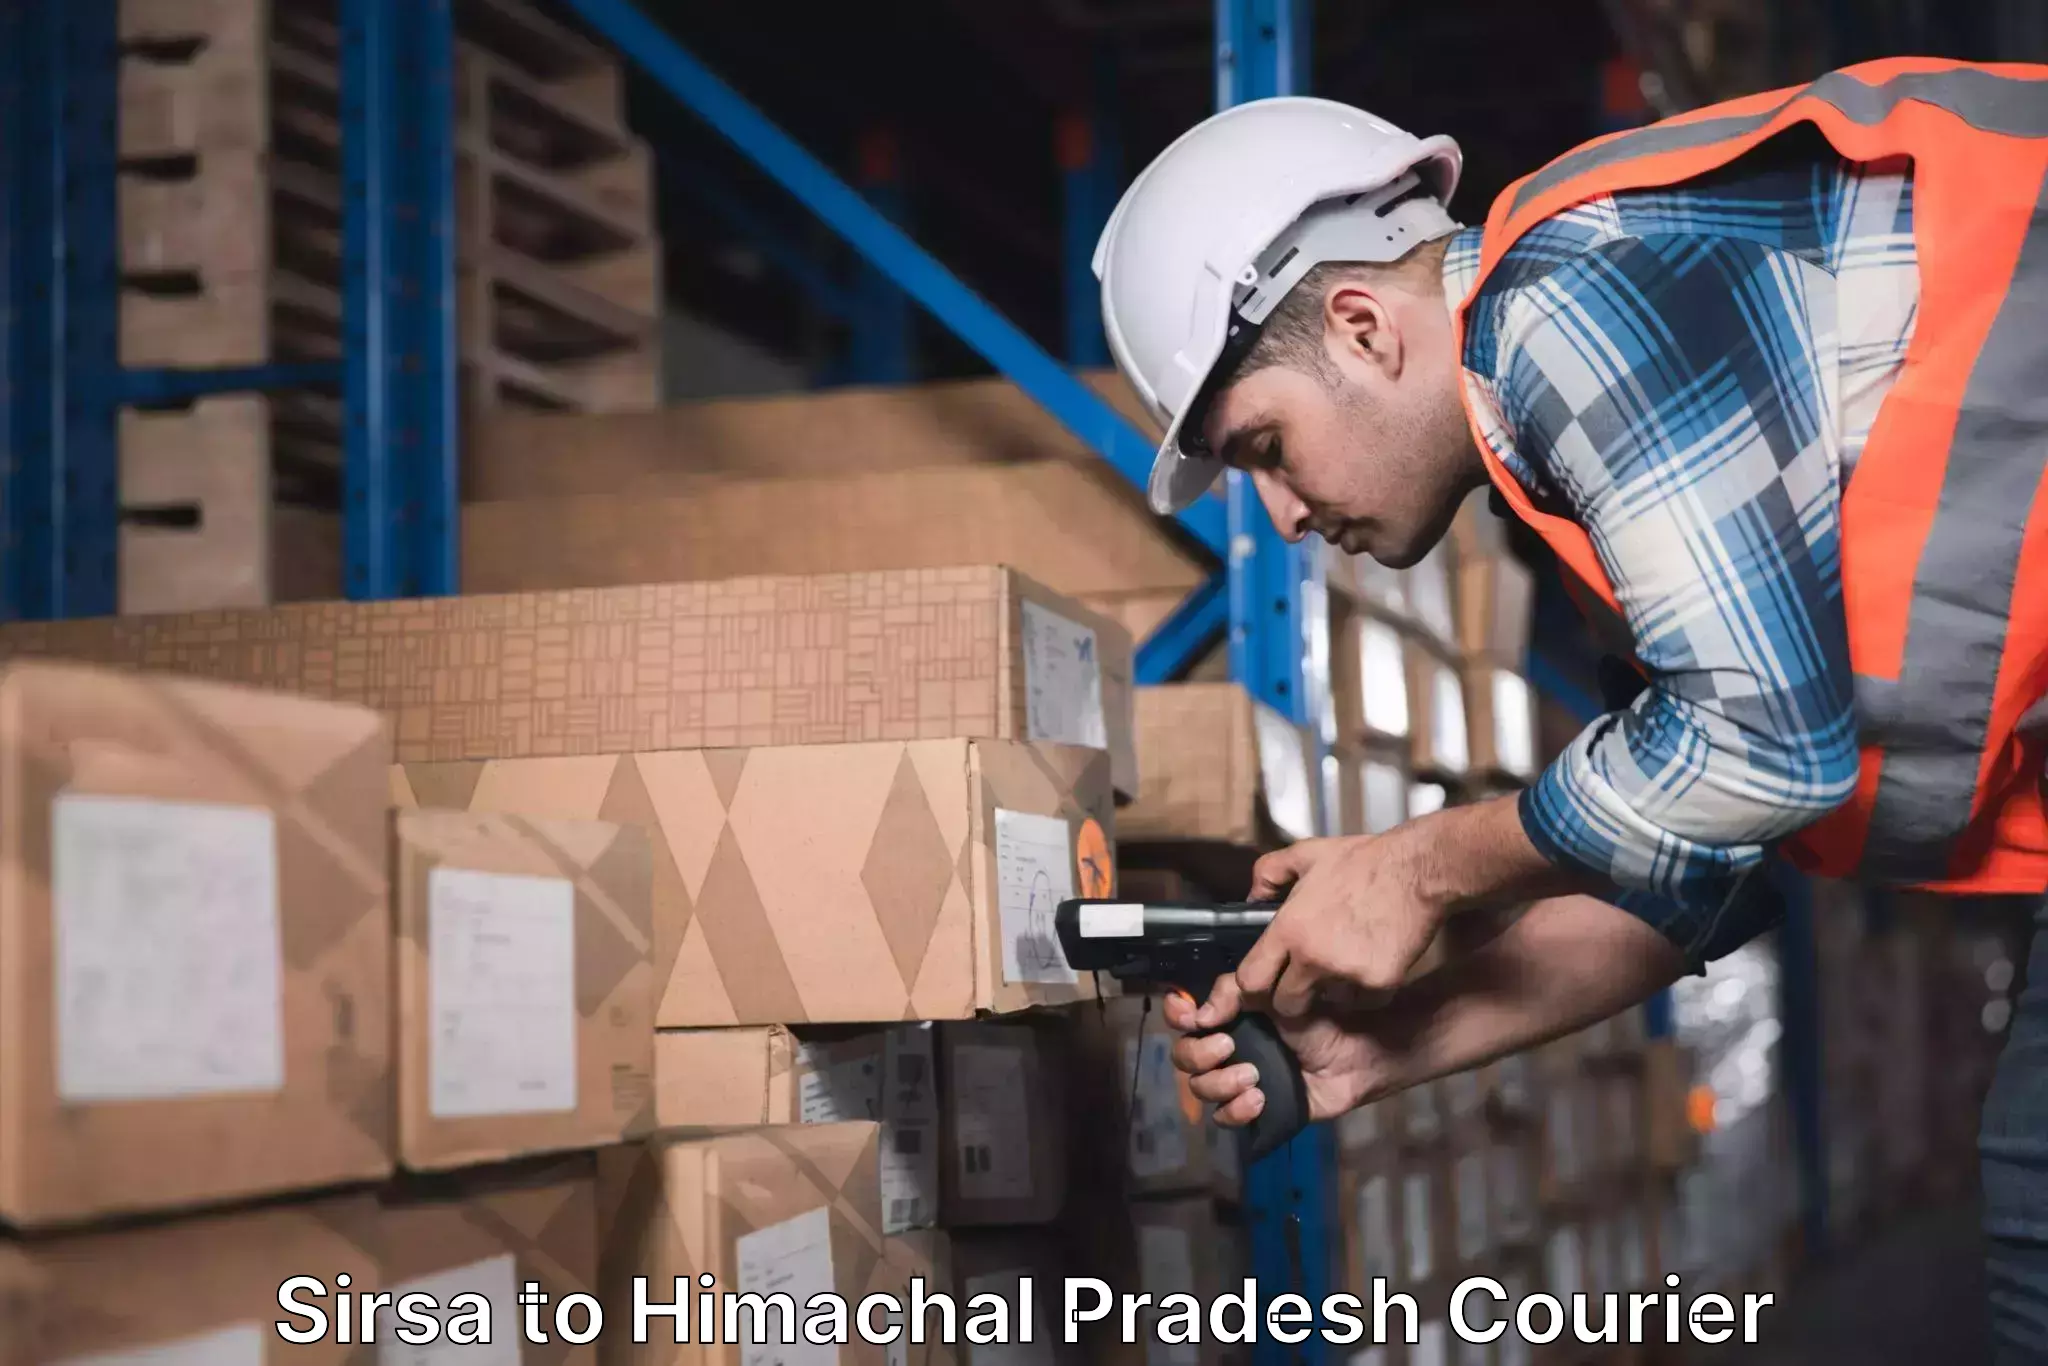 Reliable delivery network Sirsa to Himachal Pradesh